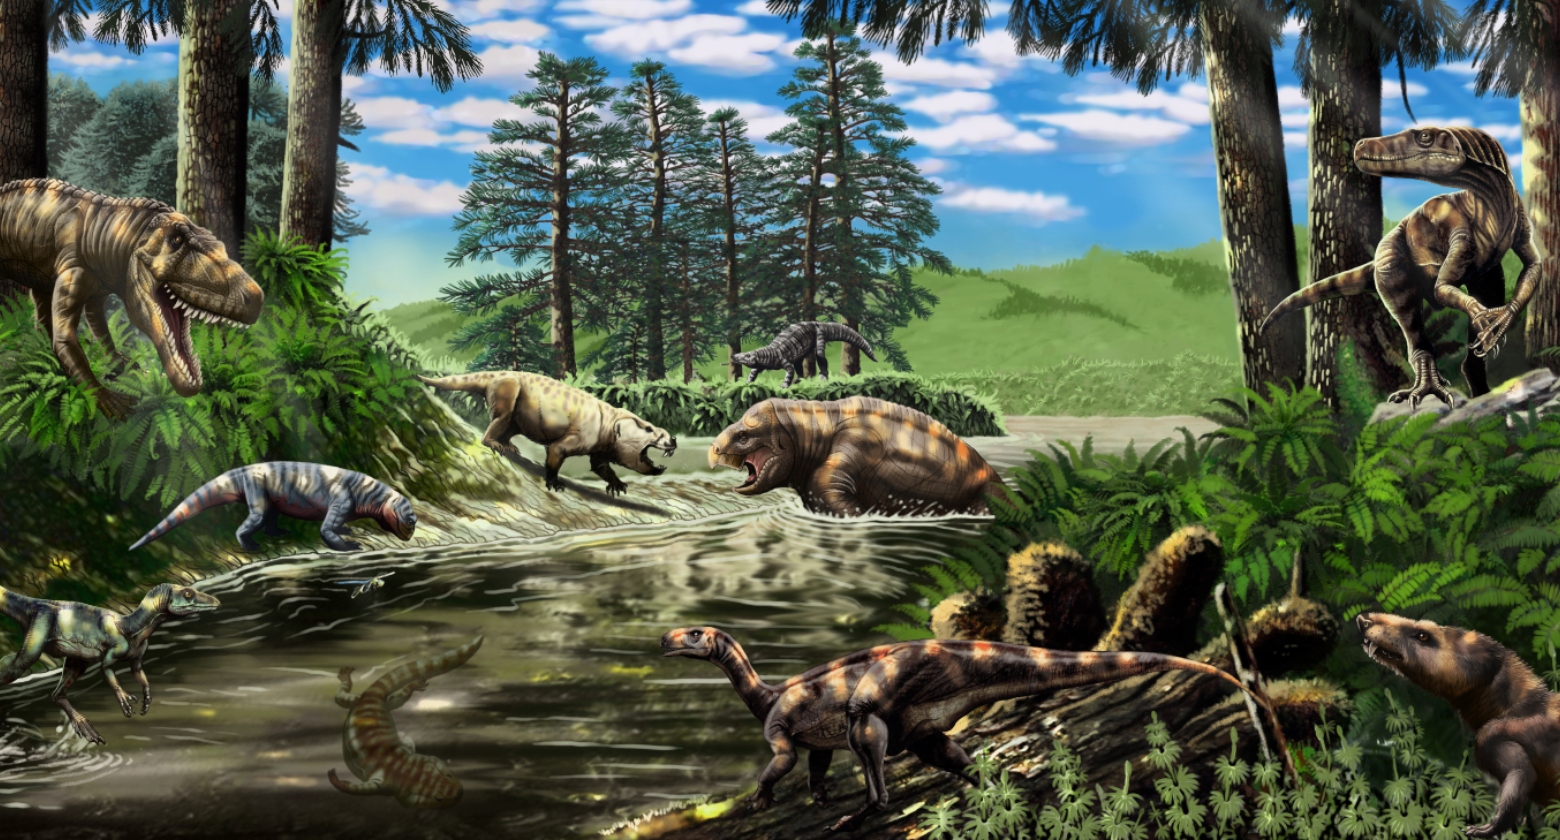 [image] NHMU Paleontologists Investigate How Climate Change Affected Life in the Age of Dinosaurs